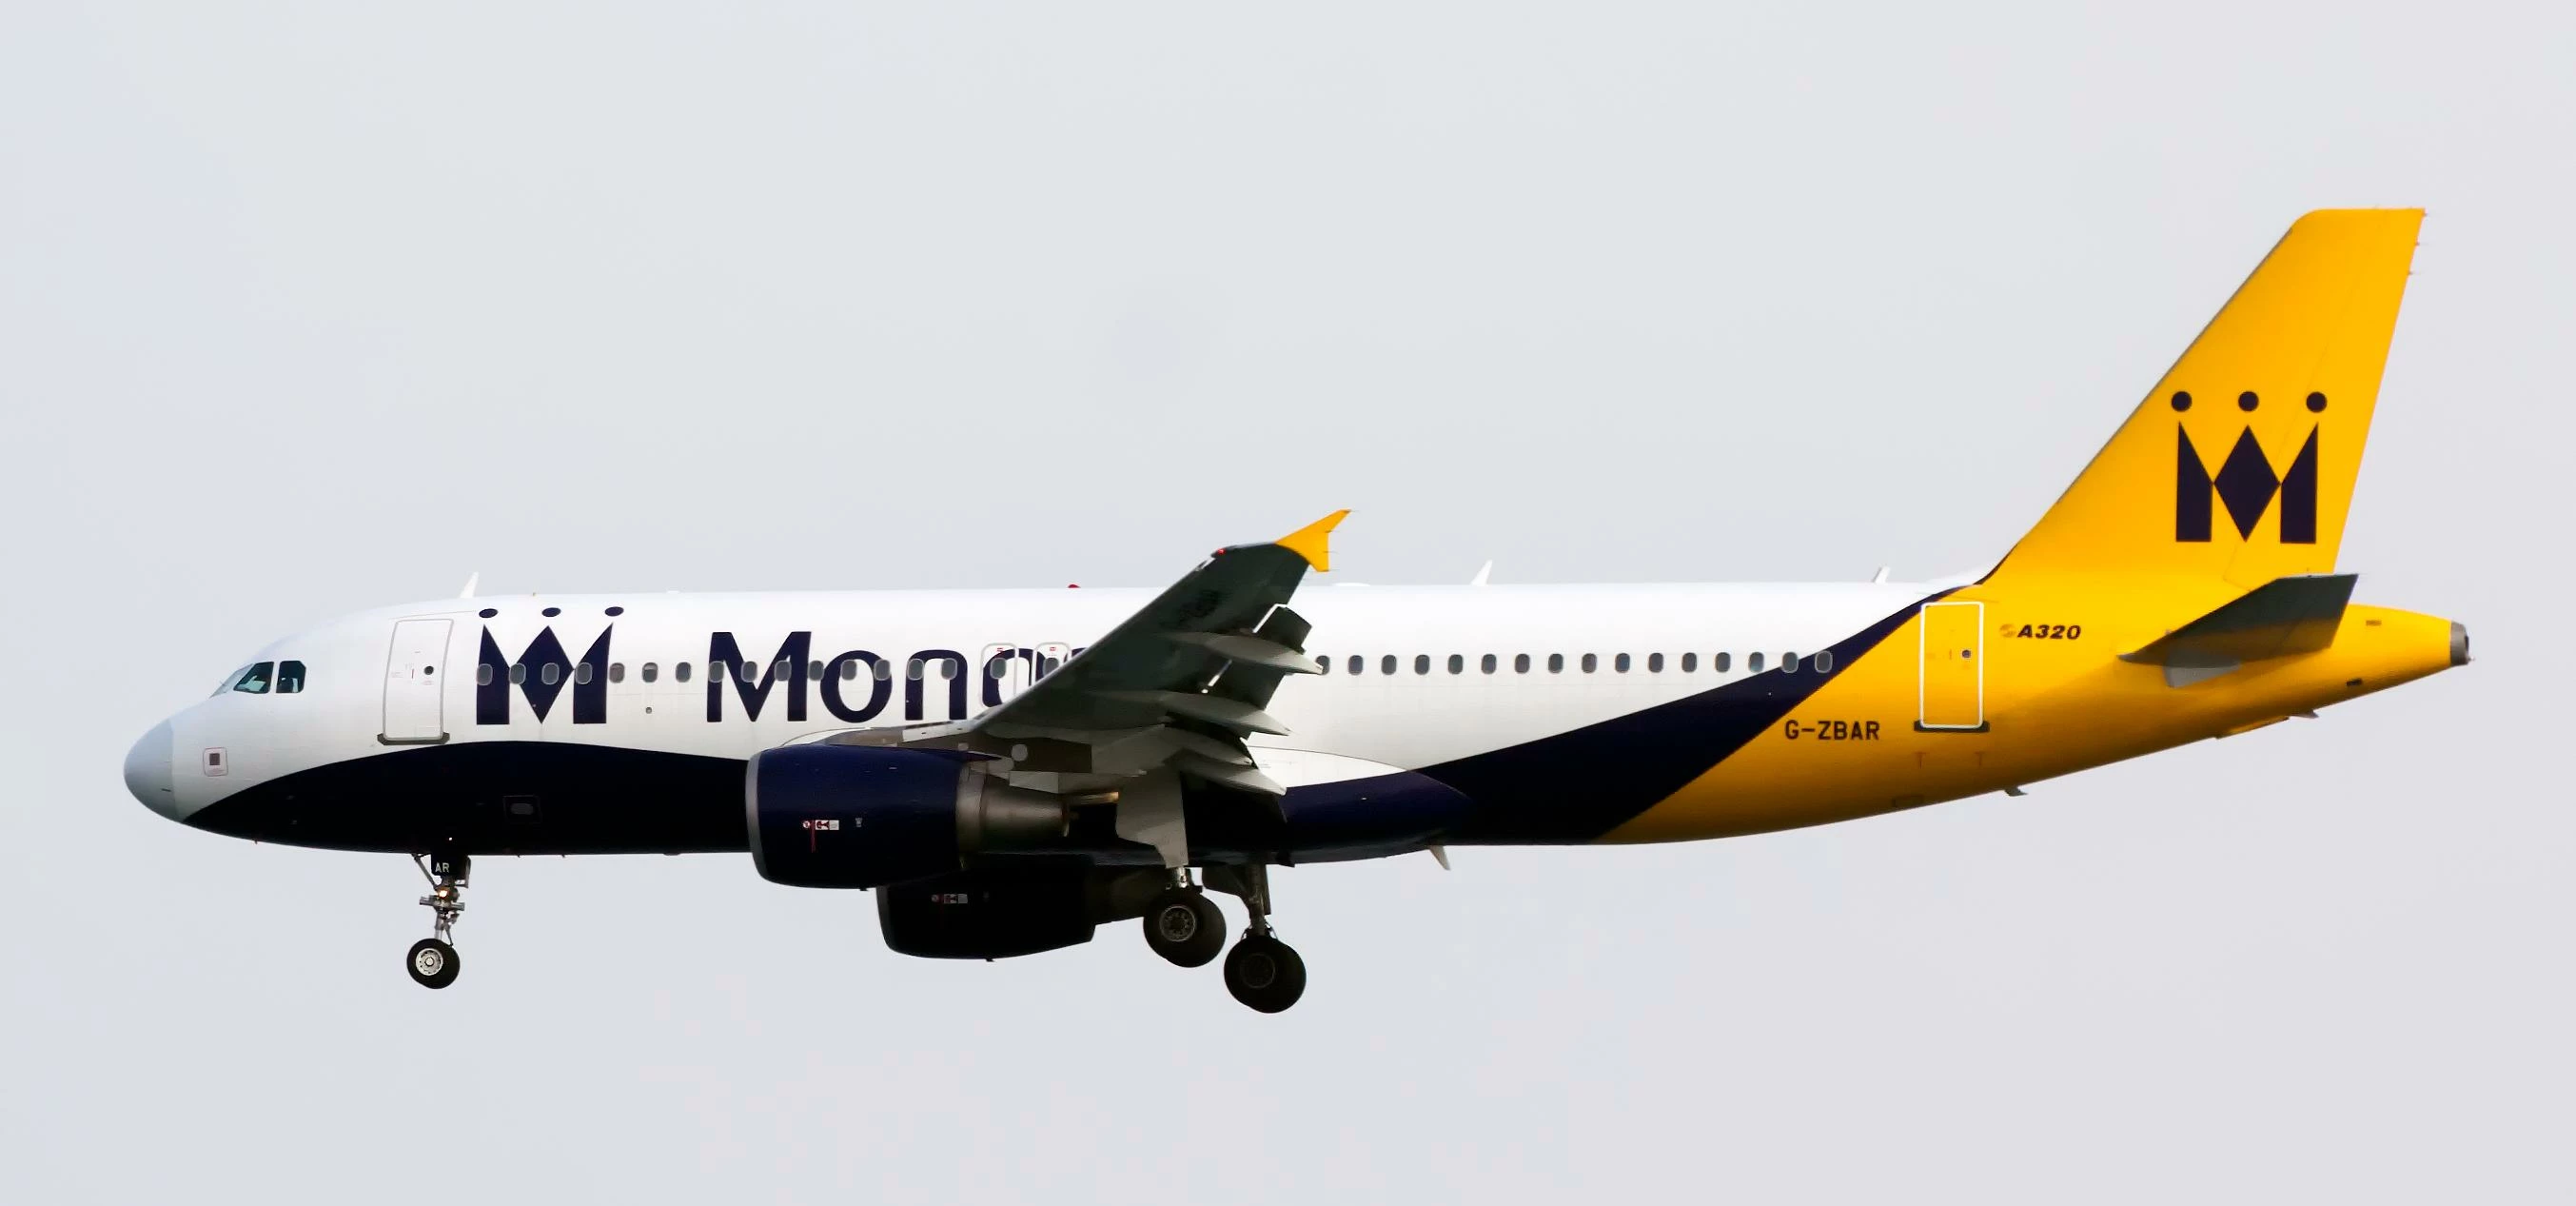 Monarch Airlines A320 G-ZBAR